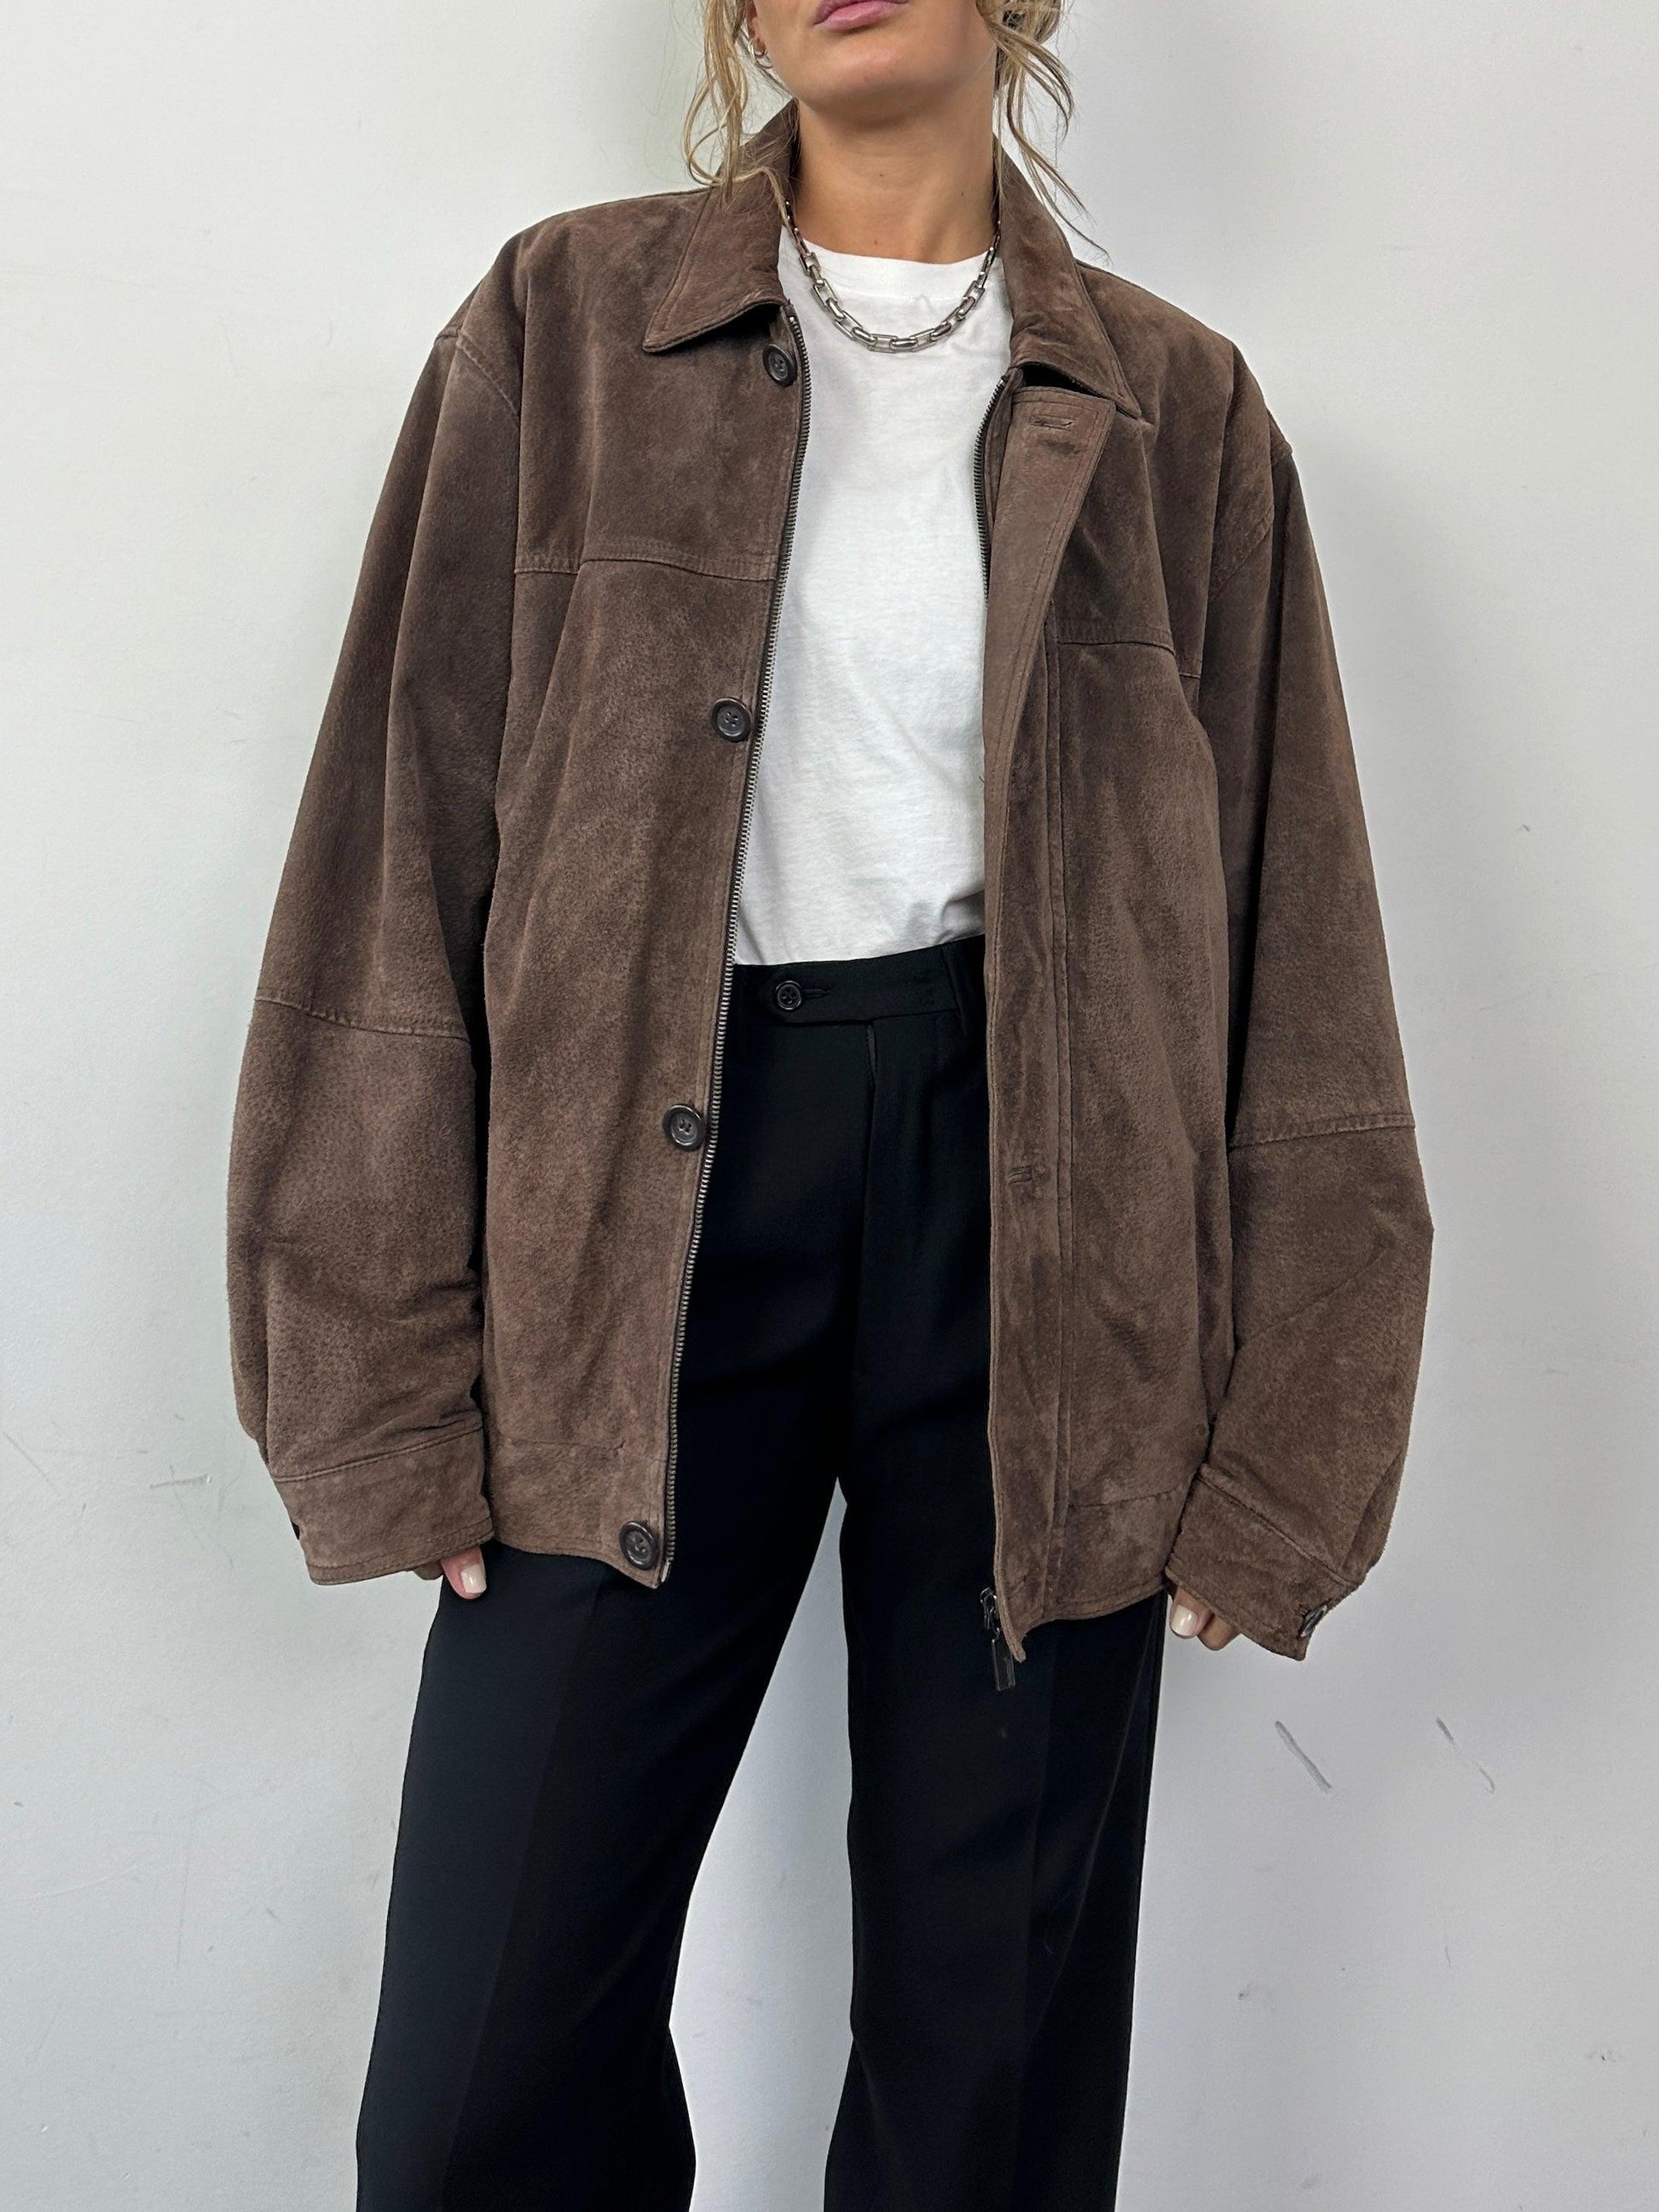 Vintage Suede Leather Bomber Jacket - L - Known Source